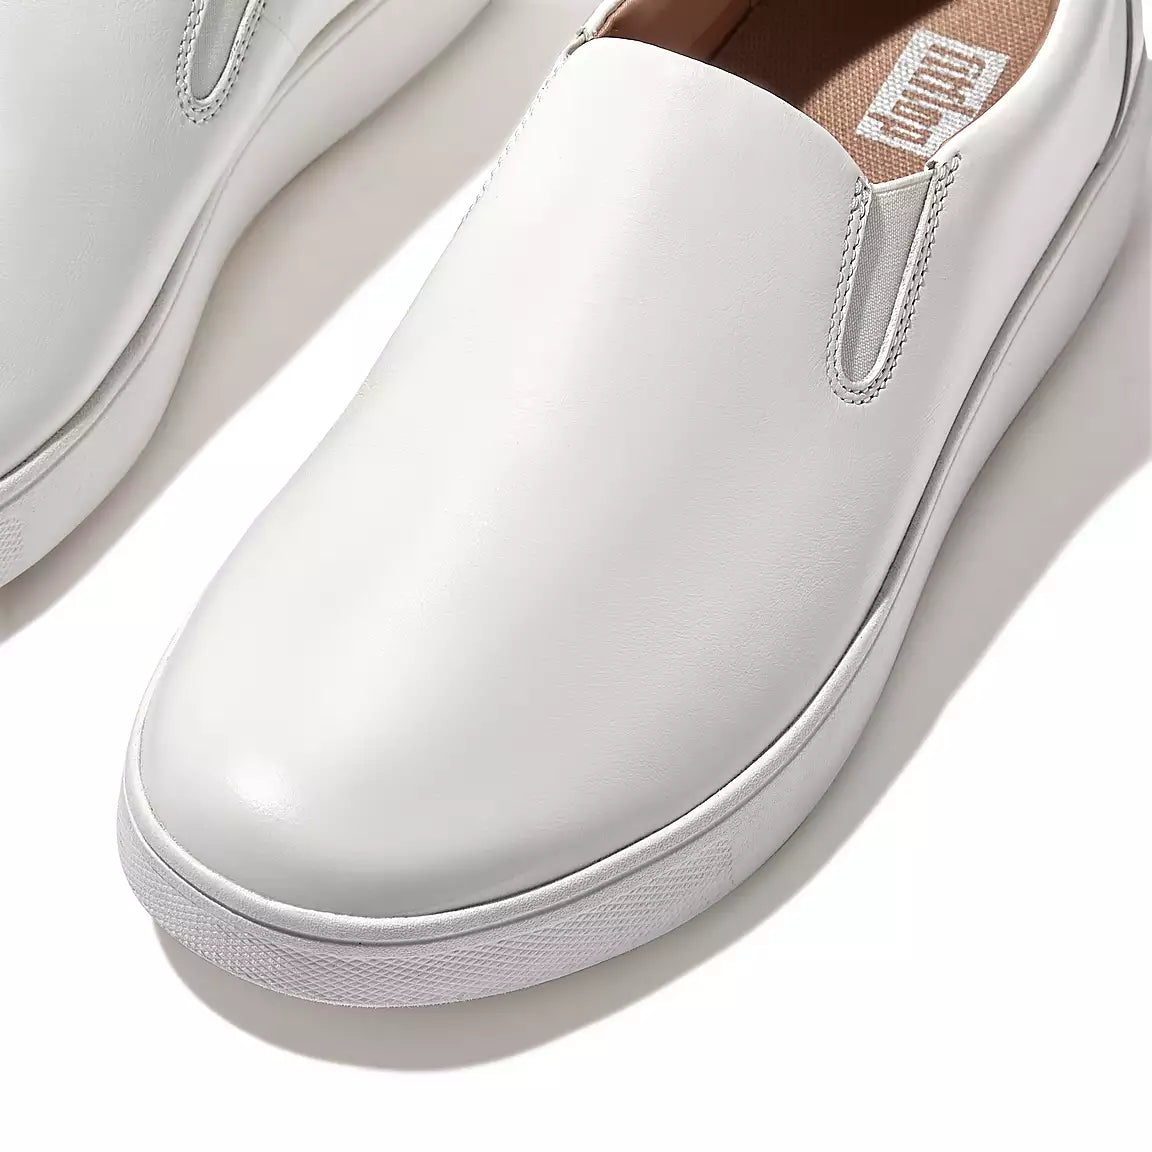 FitFlop FitFlop RALLY Leather Slip-On Skate Sneakers    